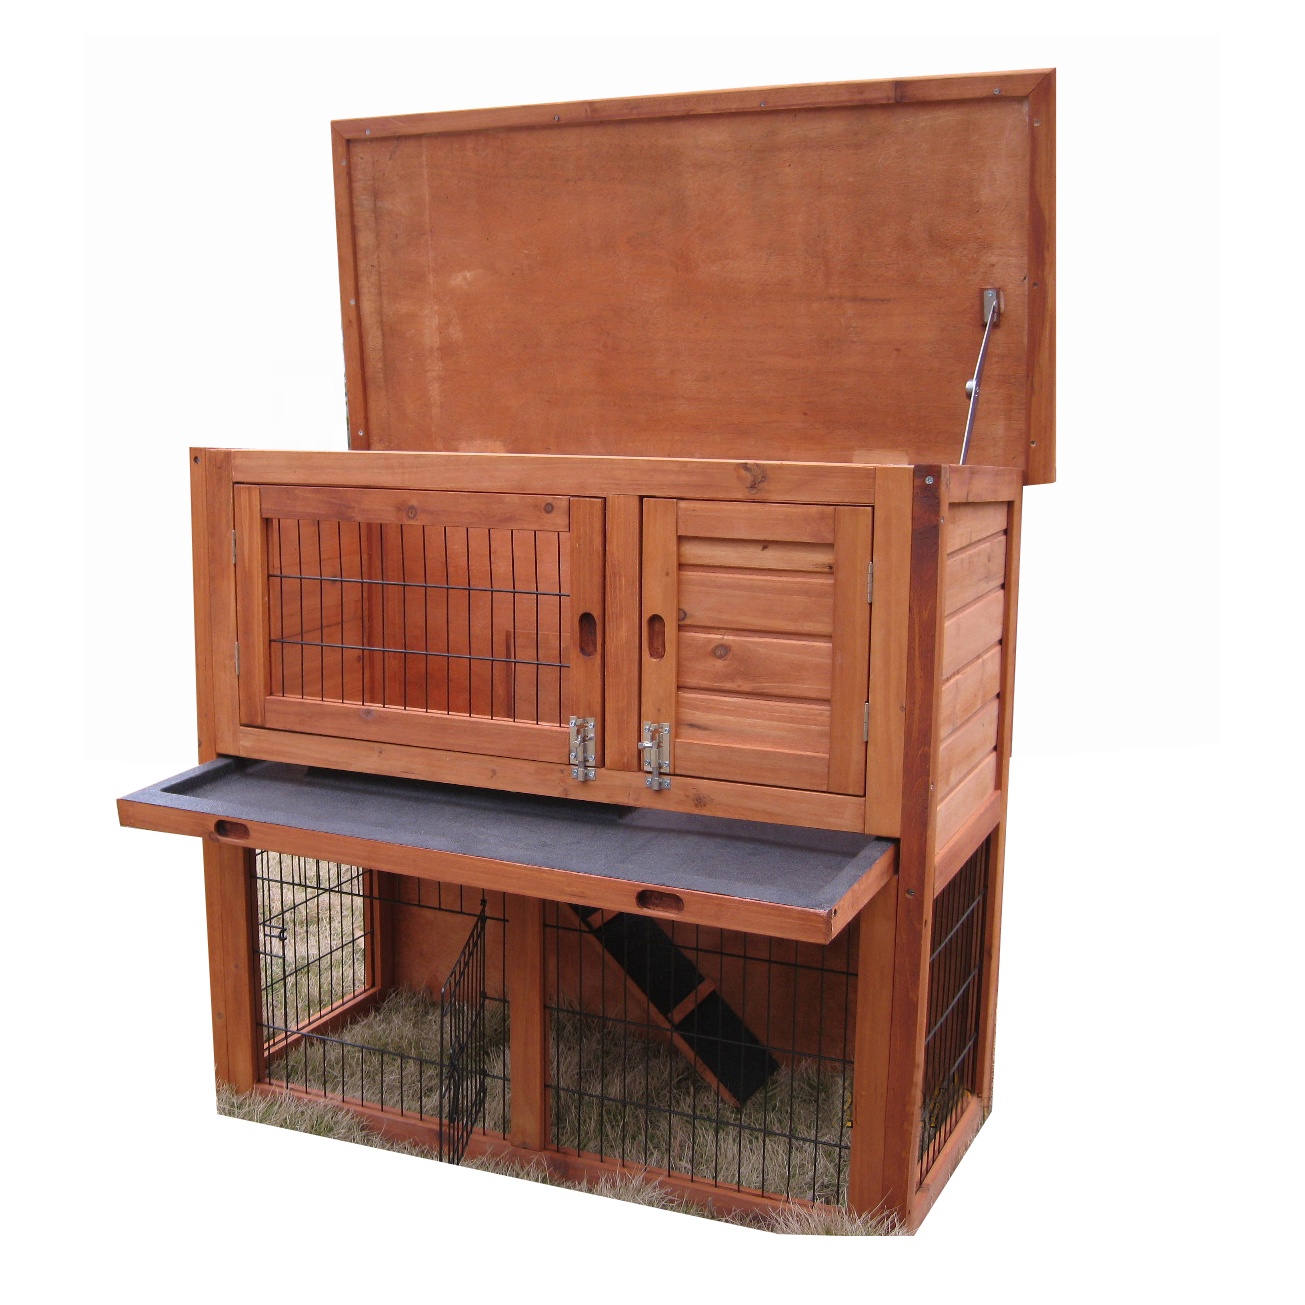 OEM/ODM China Rustic Dog Crate -
 Factory Outdoor Wooden Indoor Rabbit Hutch Elevated Cage Habitat with Enclosed Run Wheels Ideal Rabbits Guinea Pig home – Easy